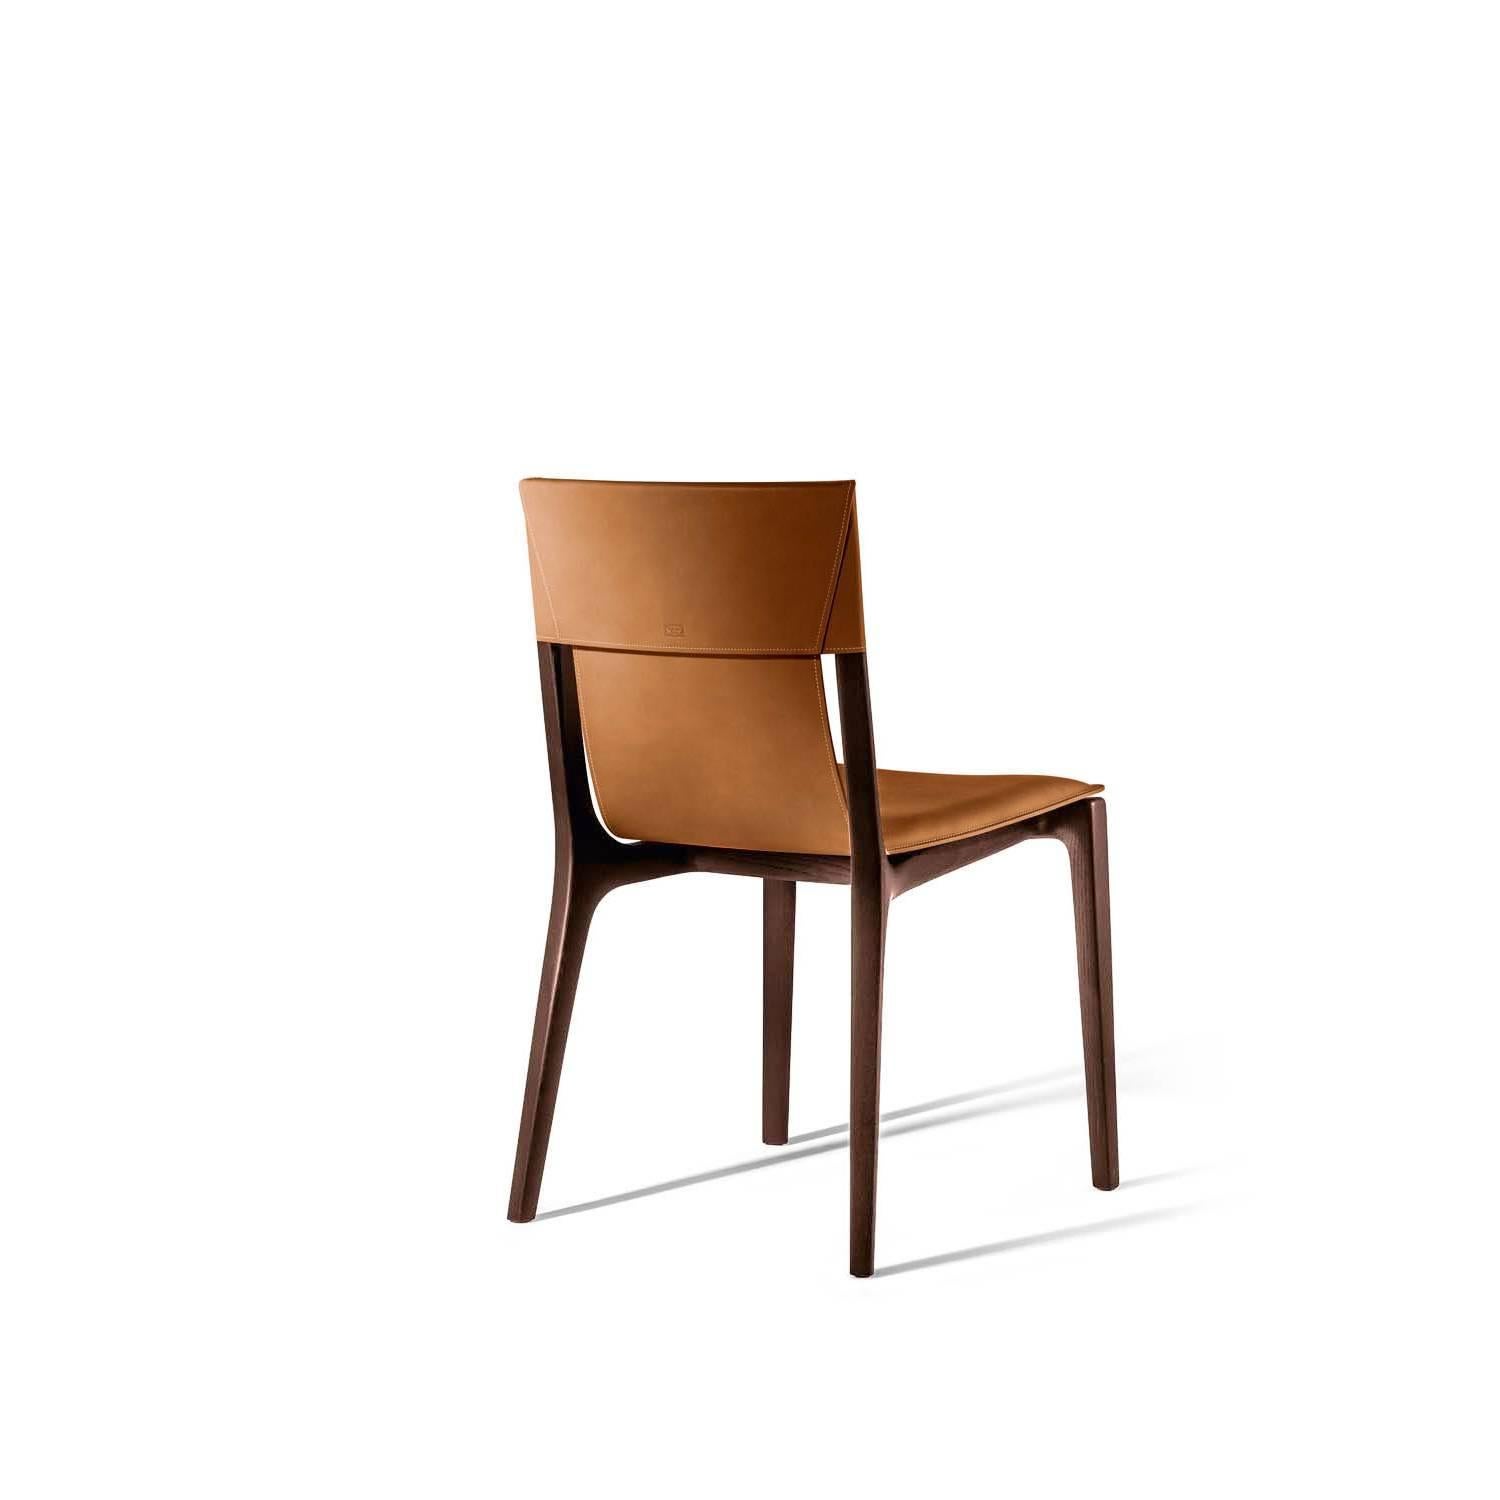 Modern Isadora Chair Cammello Saddle Extra leather Light Brown moka finishes legs For Sale